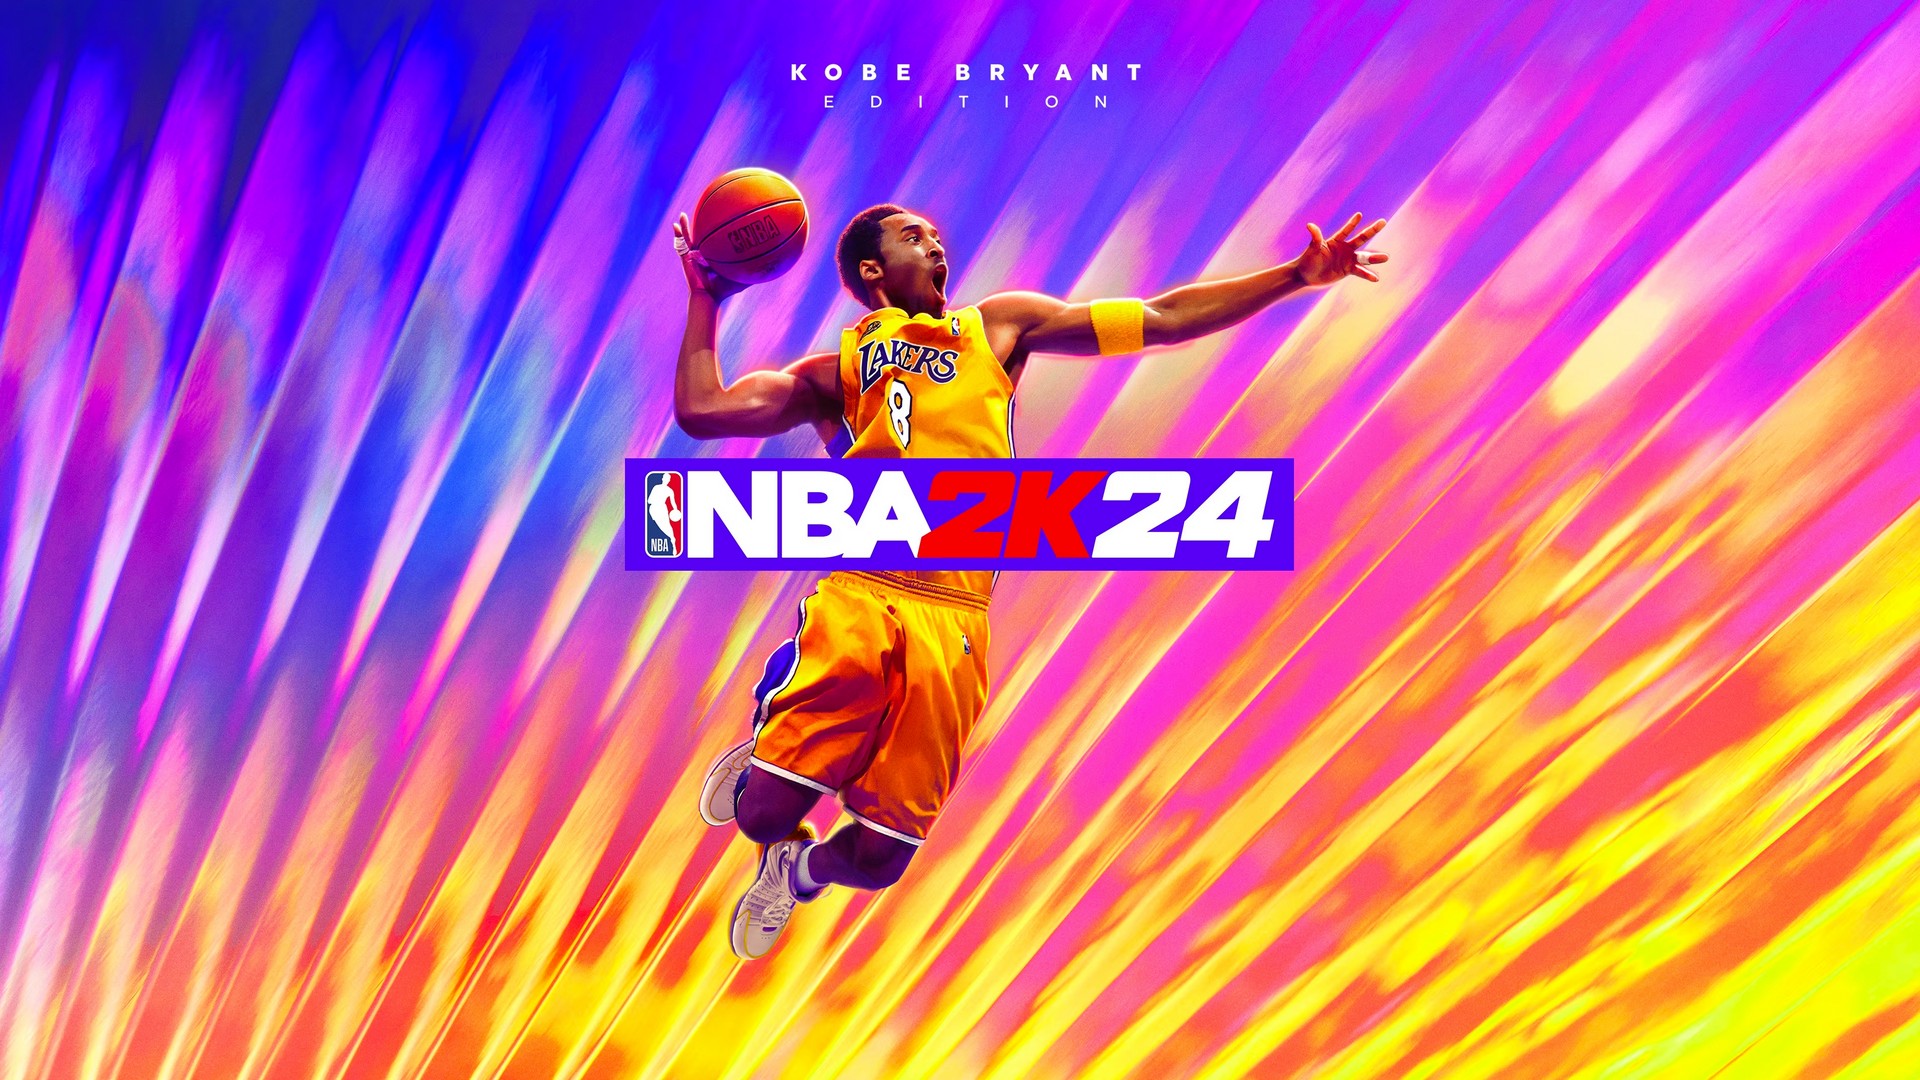 See You on the Court: NBA® 2K24 Now Available Worldwide